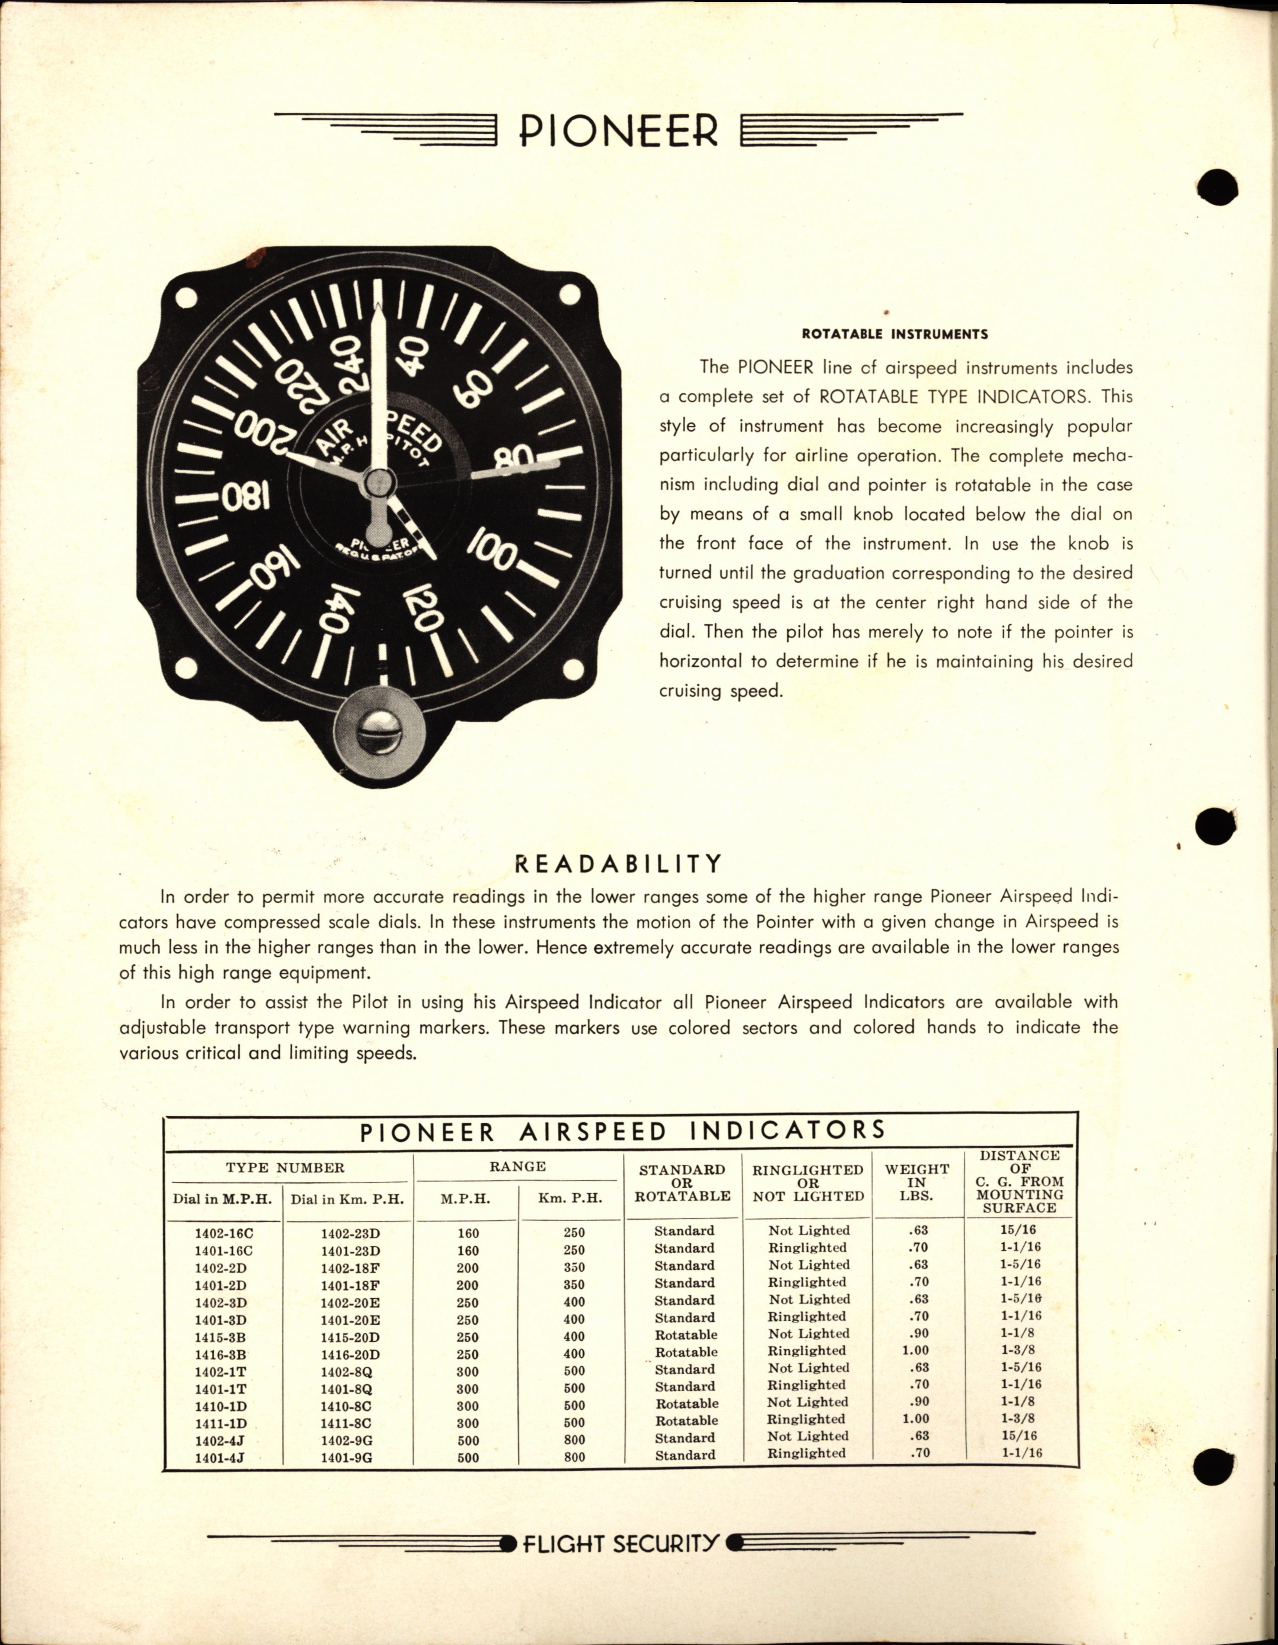 Sample page 7 from AirCorps Library document: Pioneer Aircraft Instruments